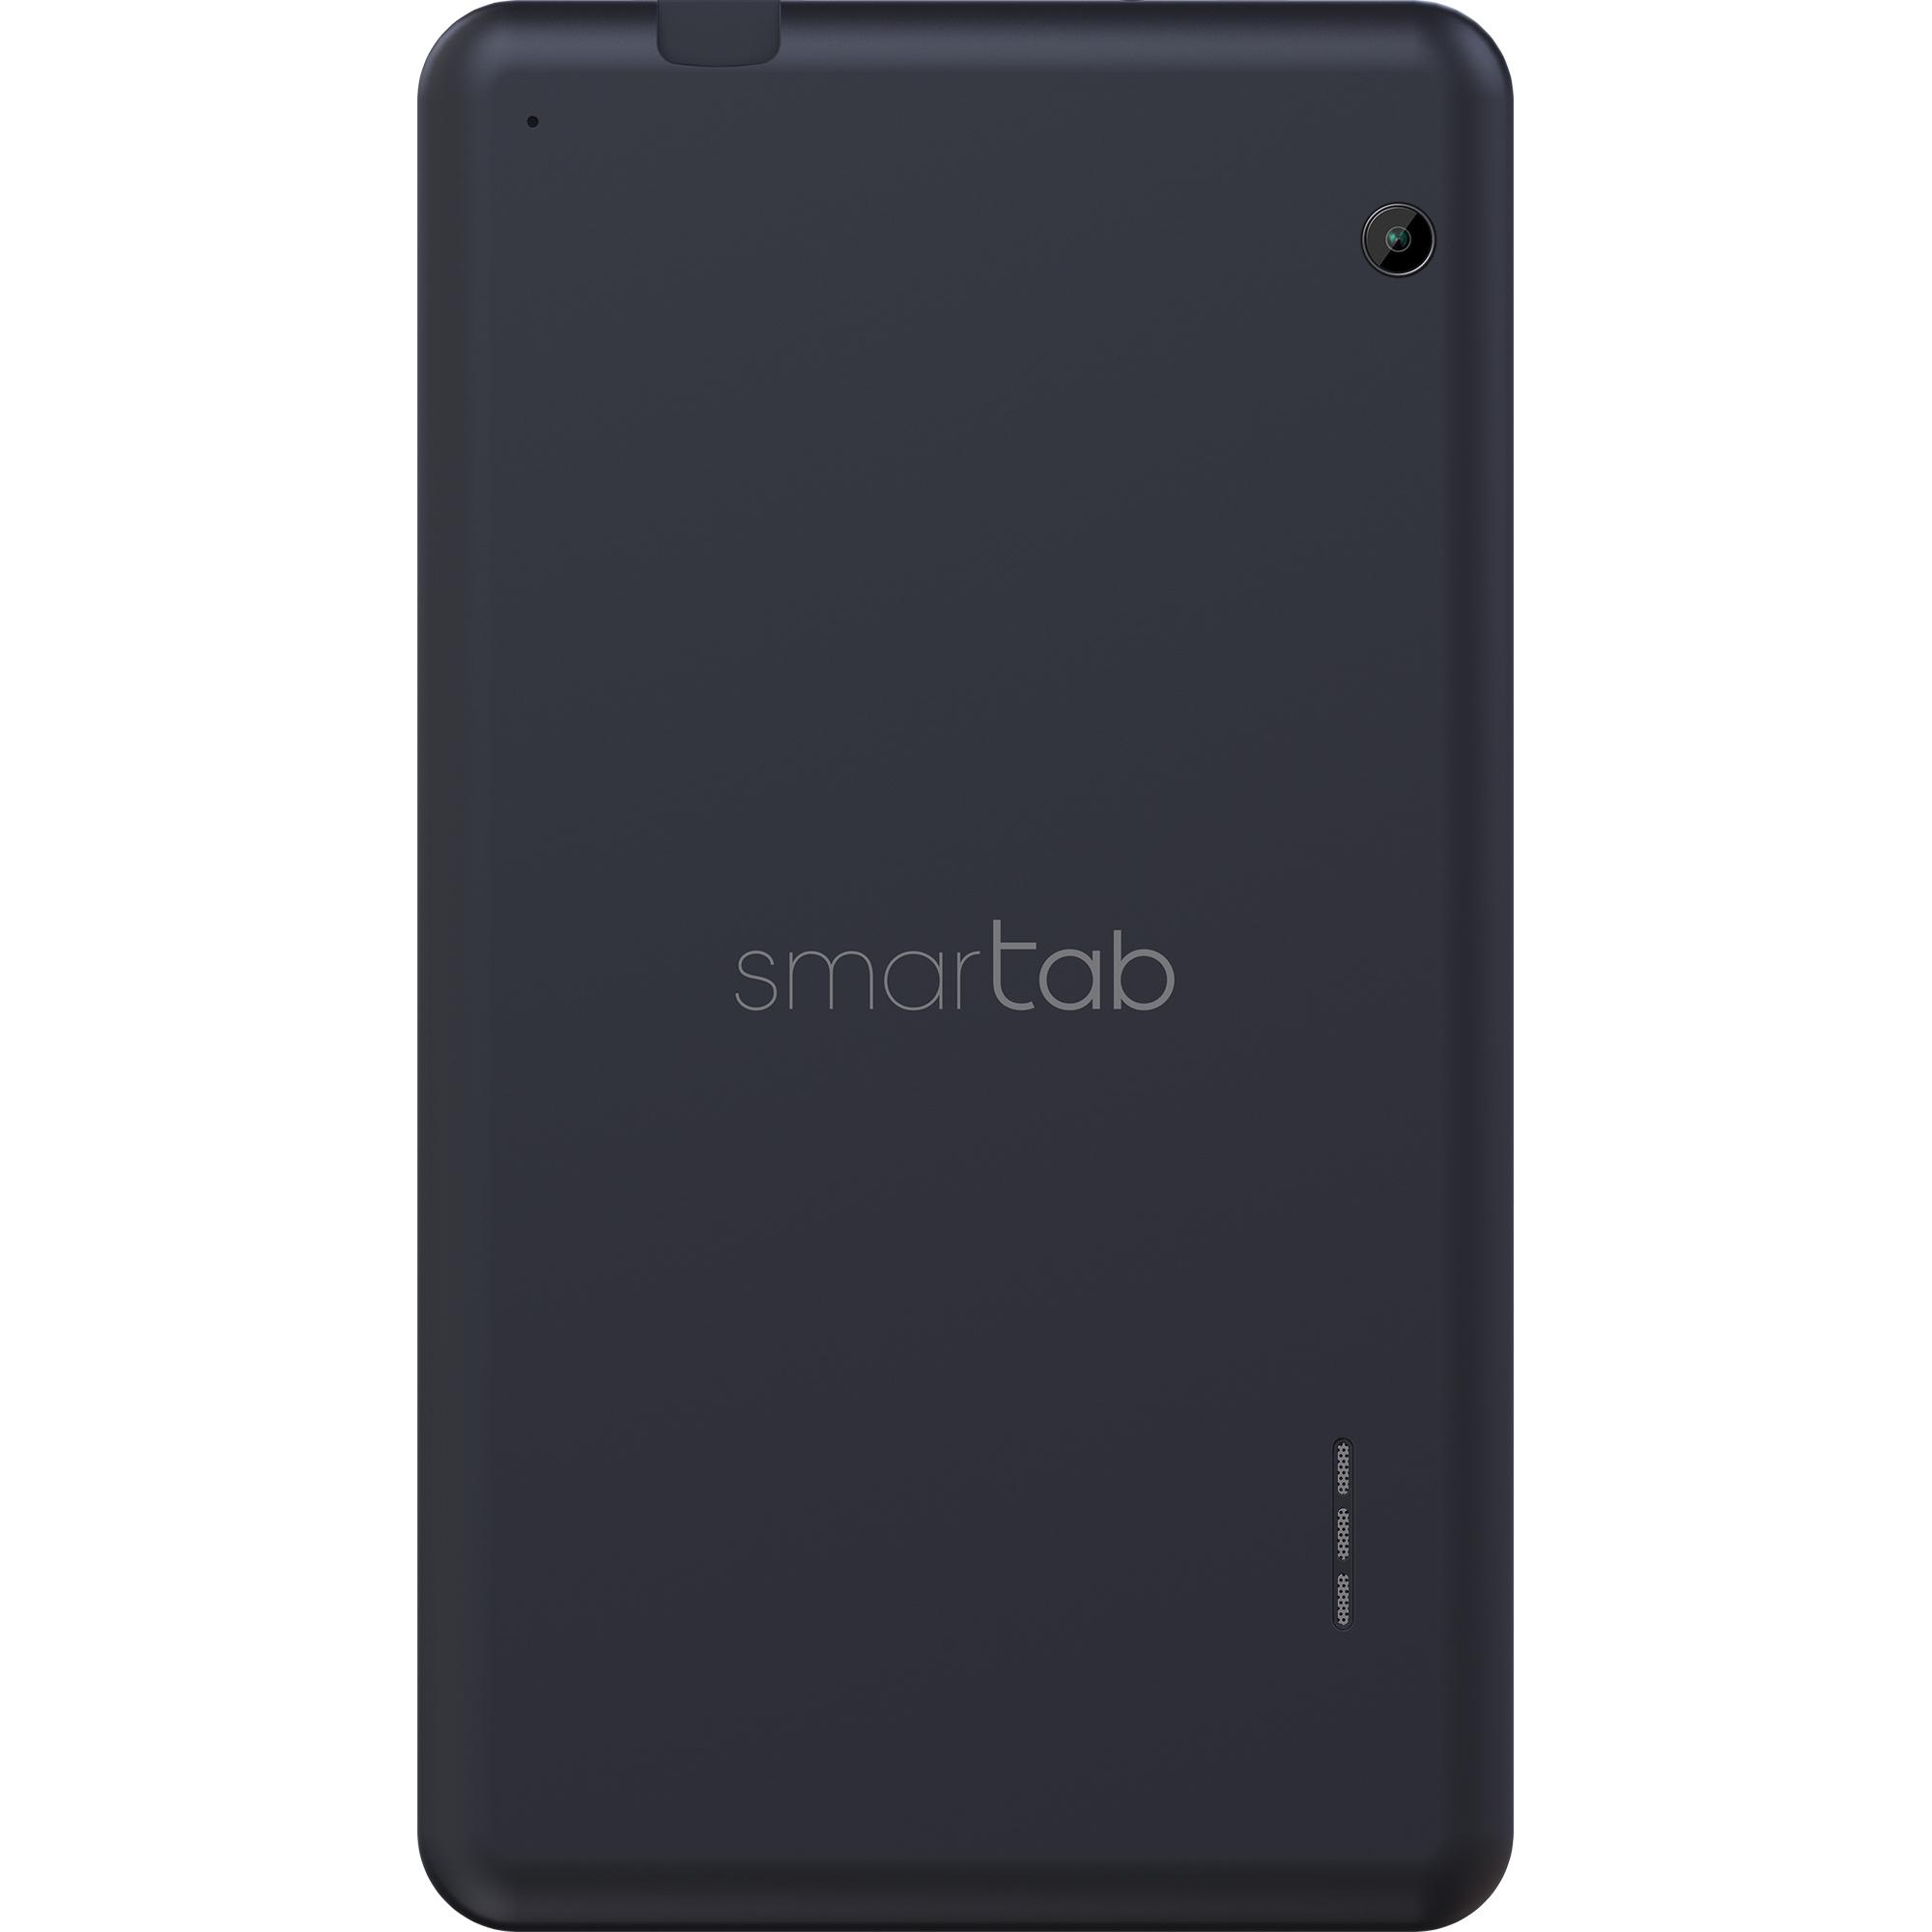 Smartab 7" 16GB Tablet Android OS - Black - ST7150 - image 5 of 5